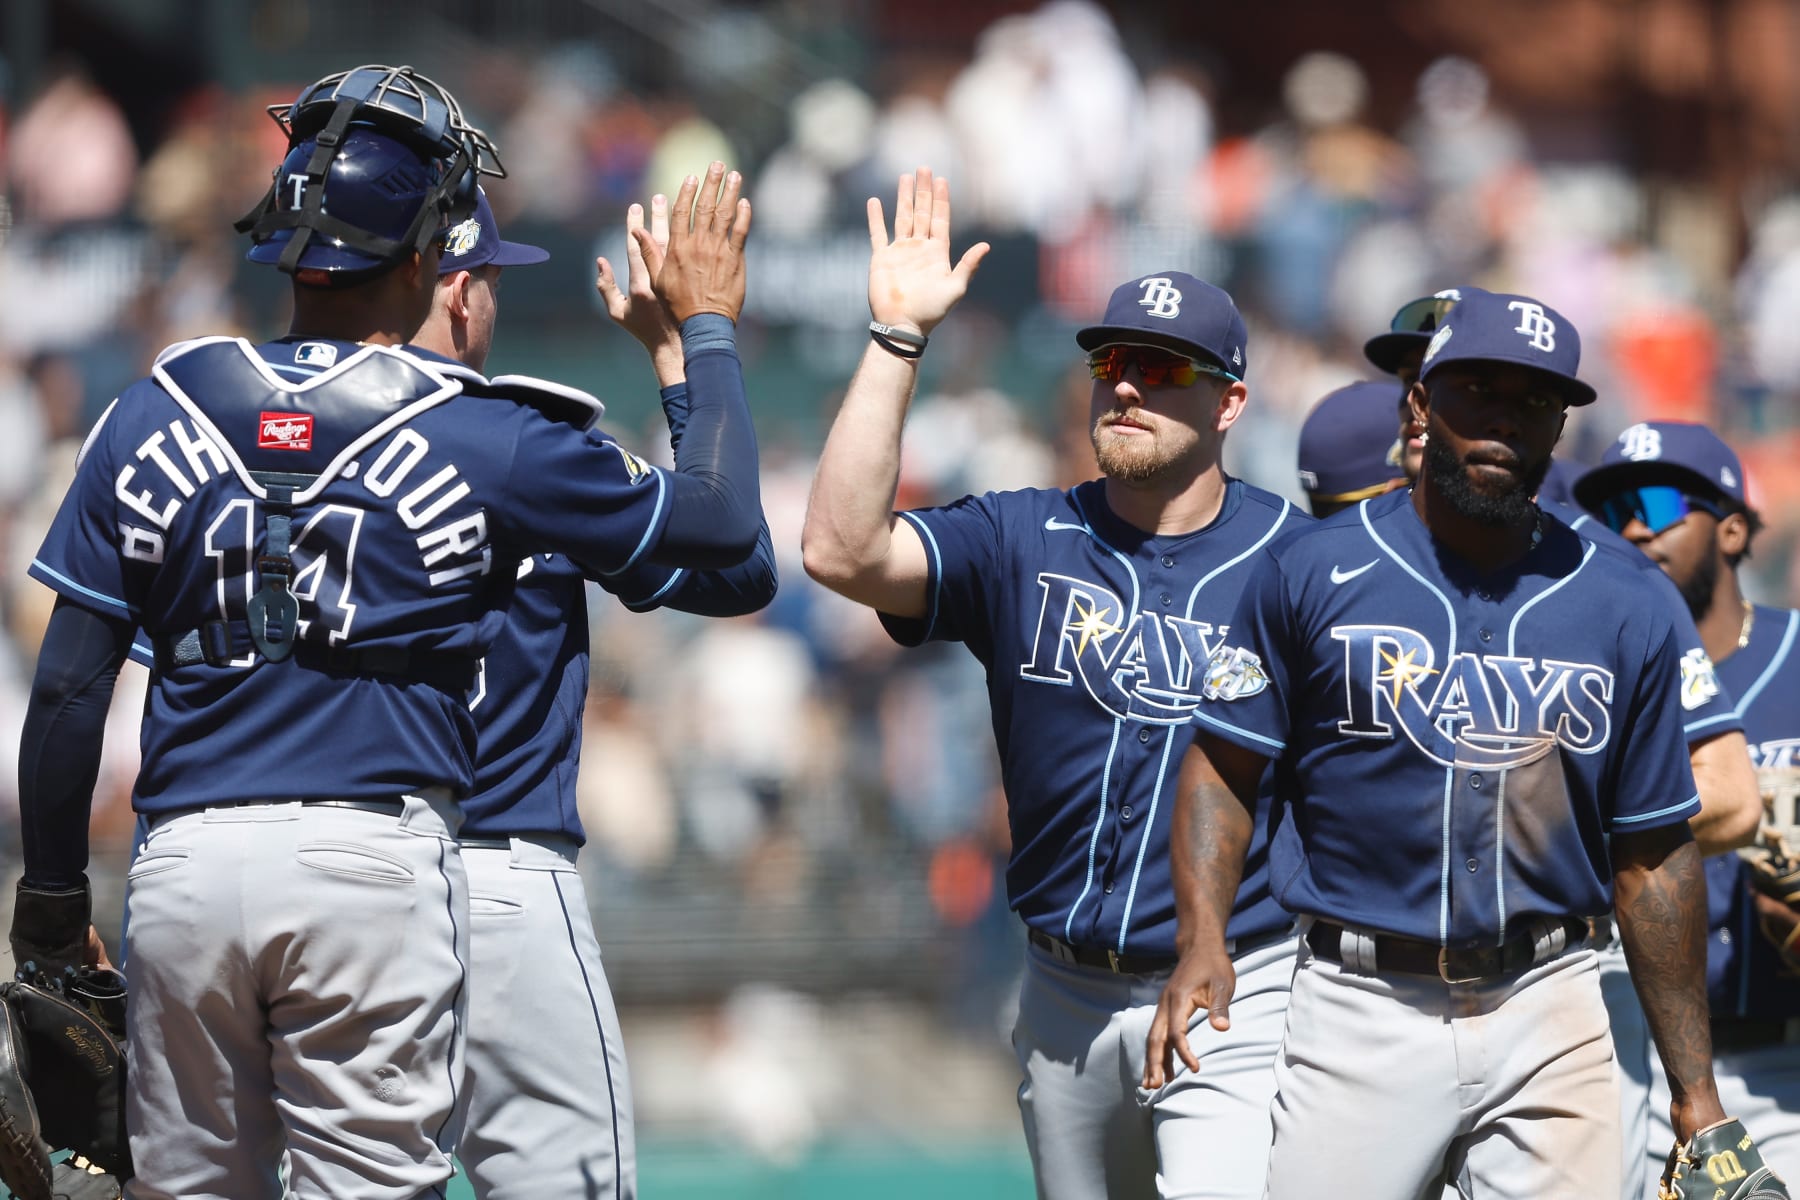 MLB Stats on X: The Tampa Bay Rays have matched the longest